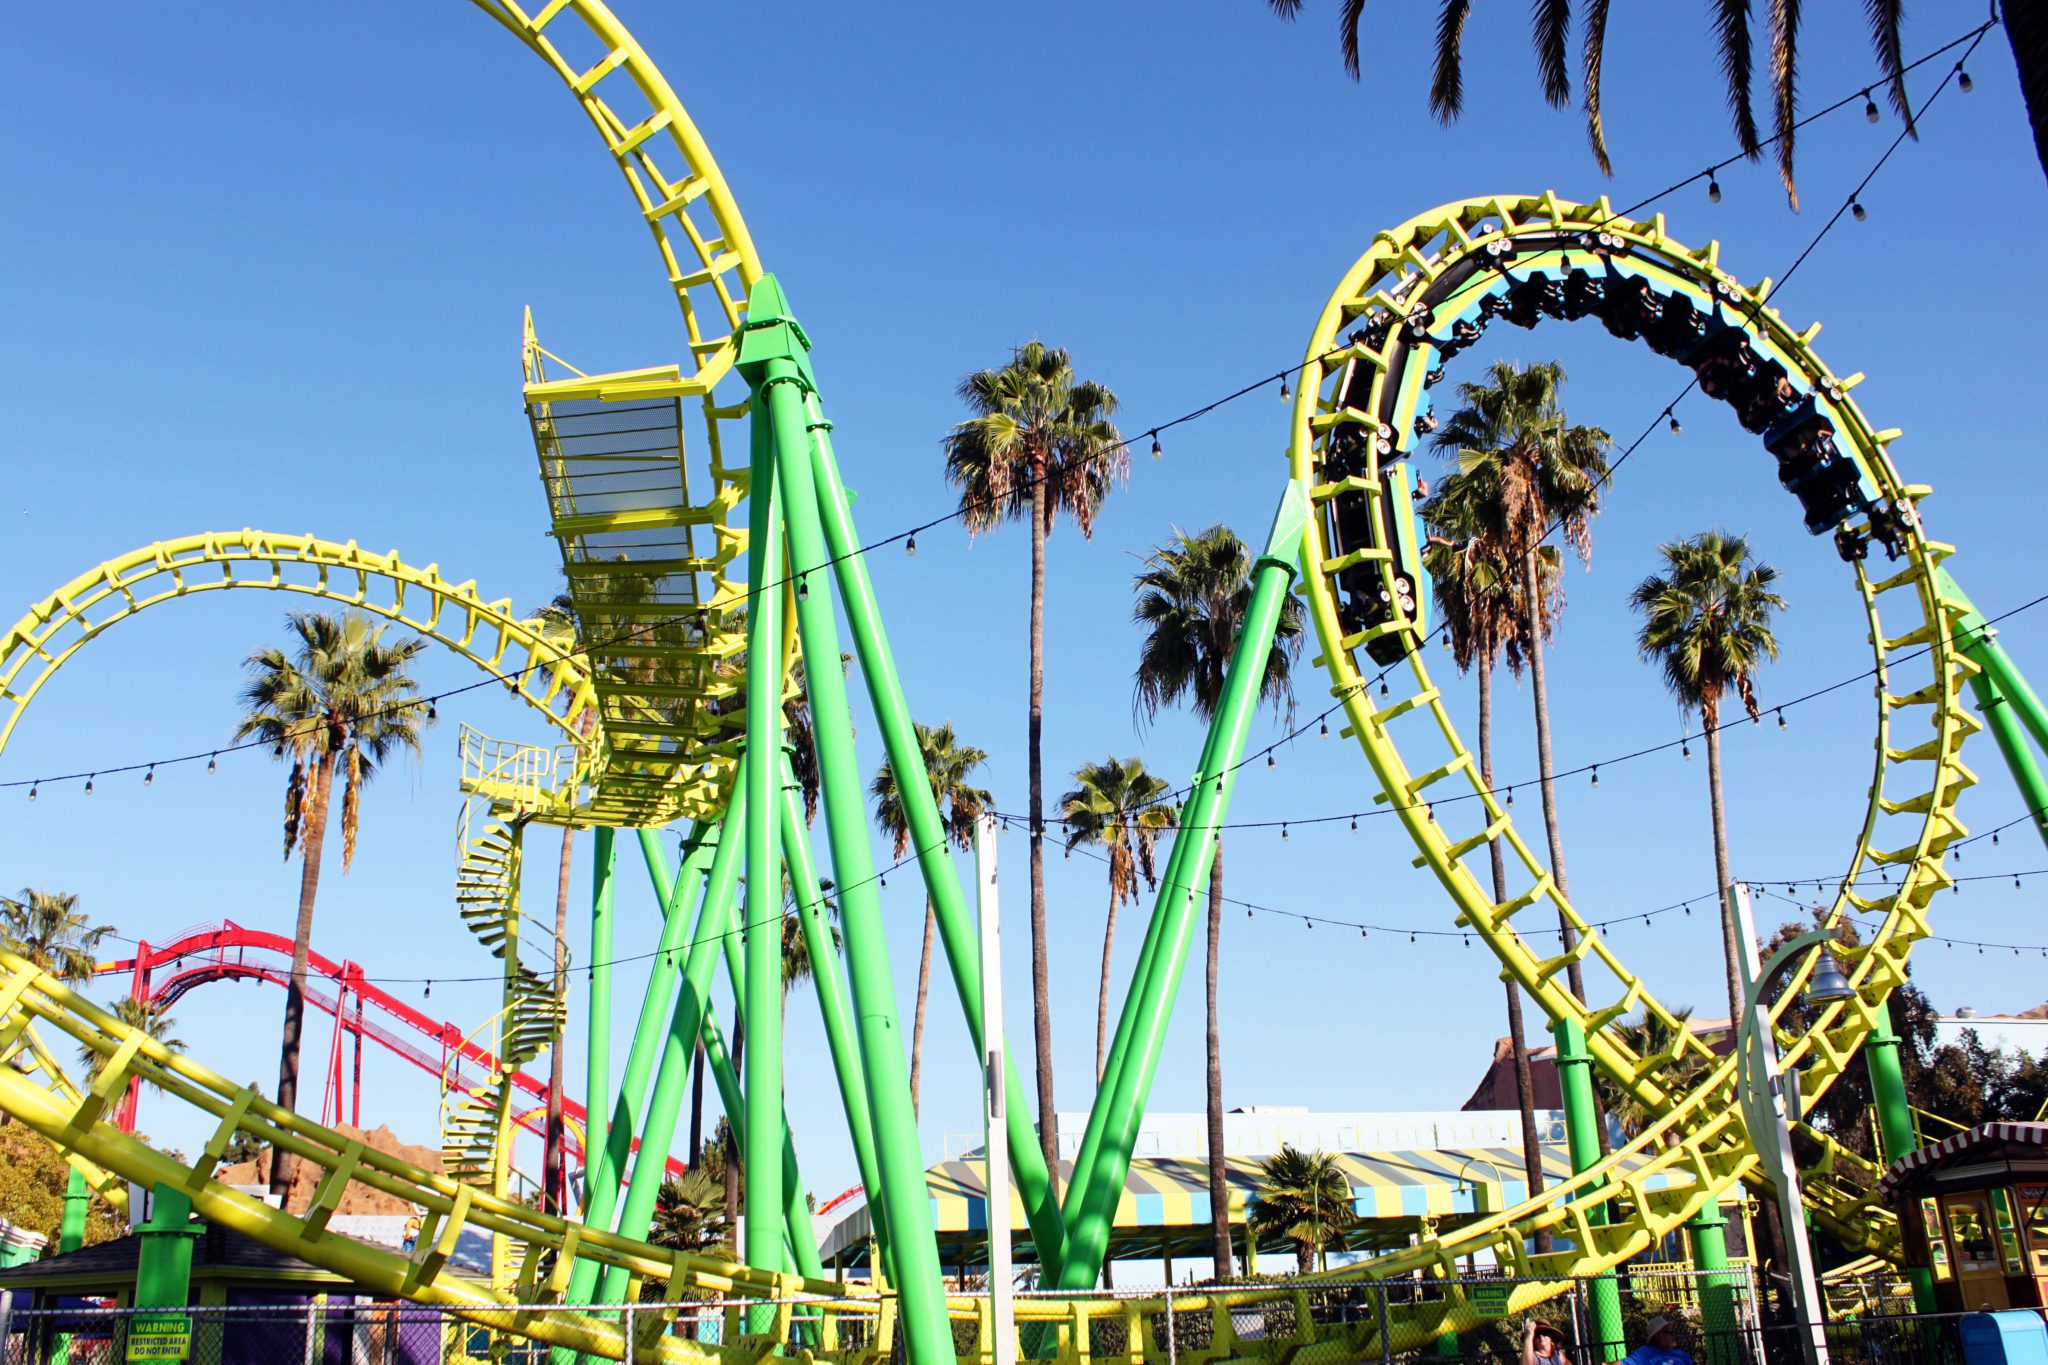 Discover a great alternative to Disneyland | 13 awesome things to do in  LA with kids #knottsberryfarm #california #LA #simplywander